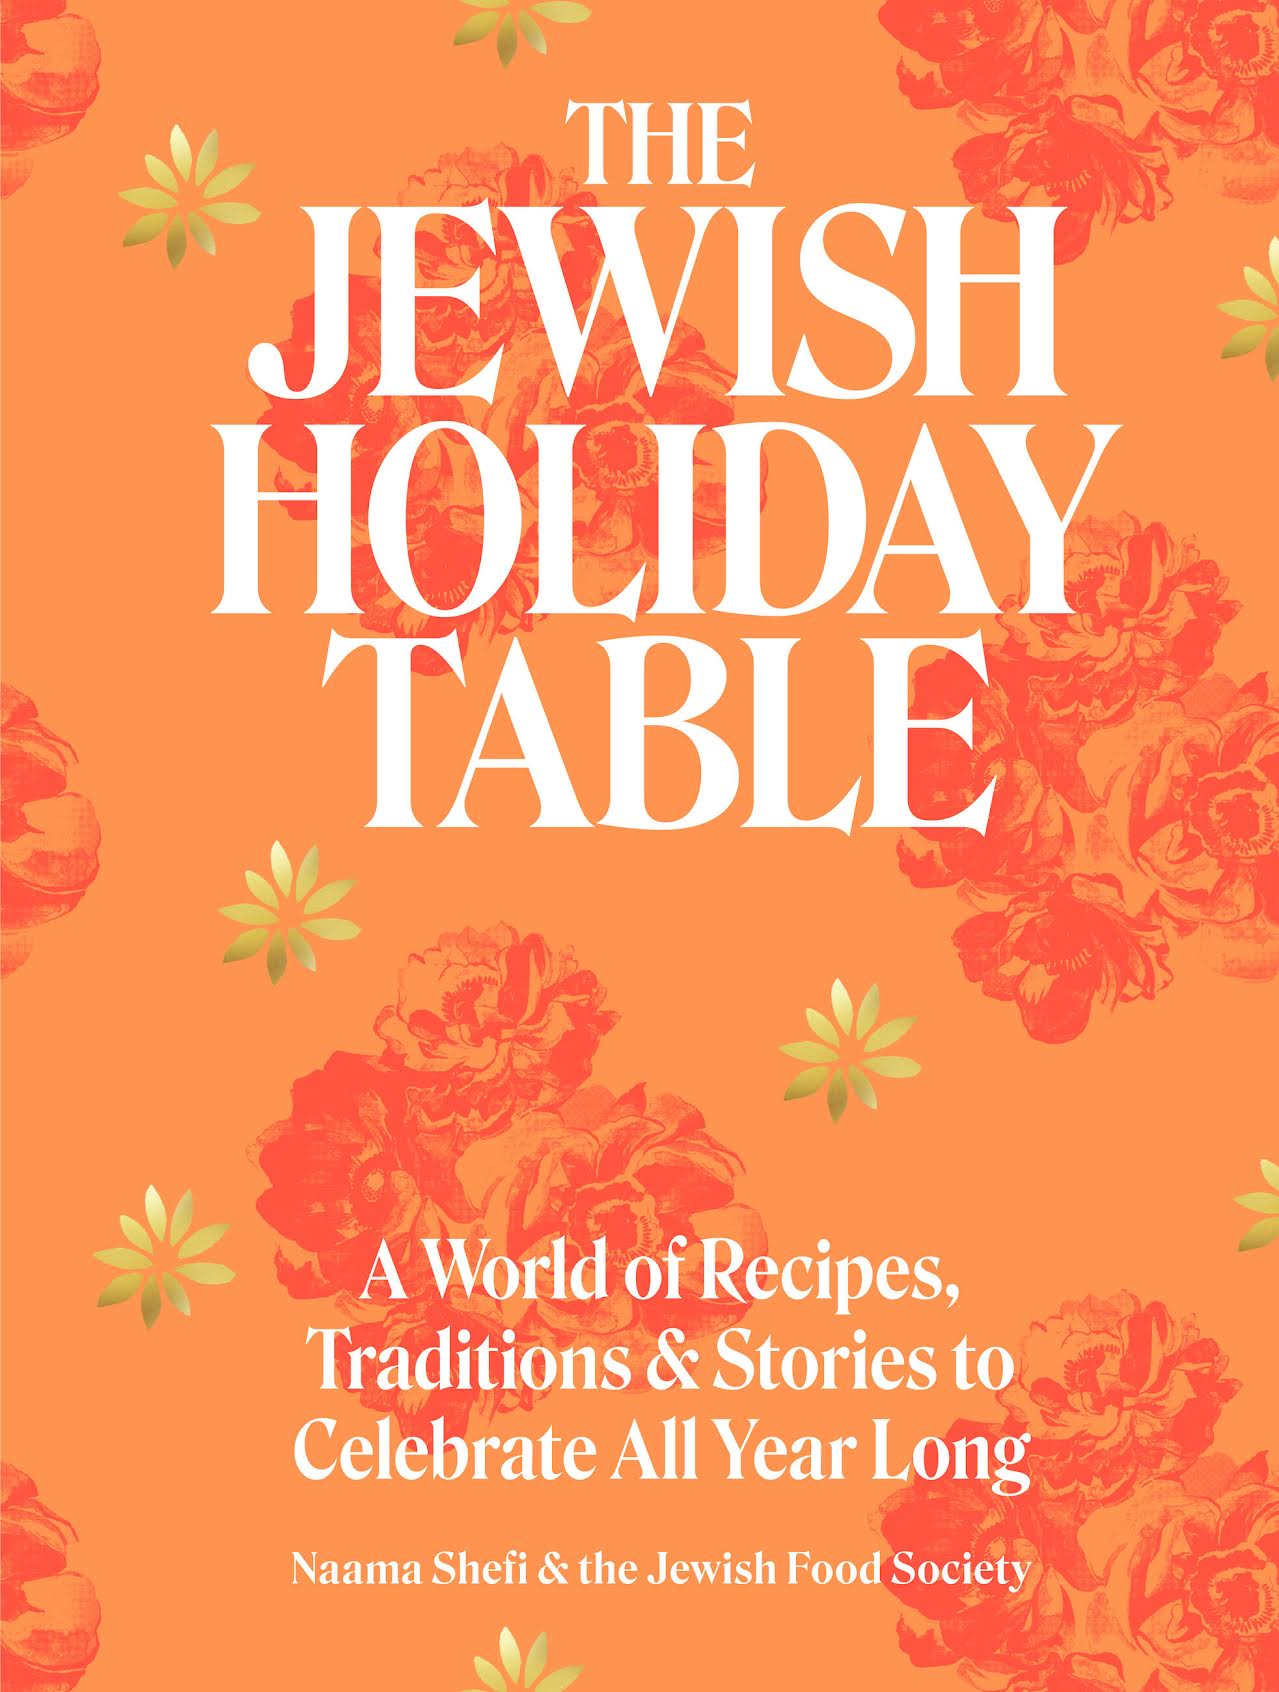 Book Launch: The Jewish Holiday Table by Naama Shefi, in Conversation with Jake Cohen